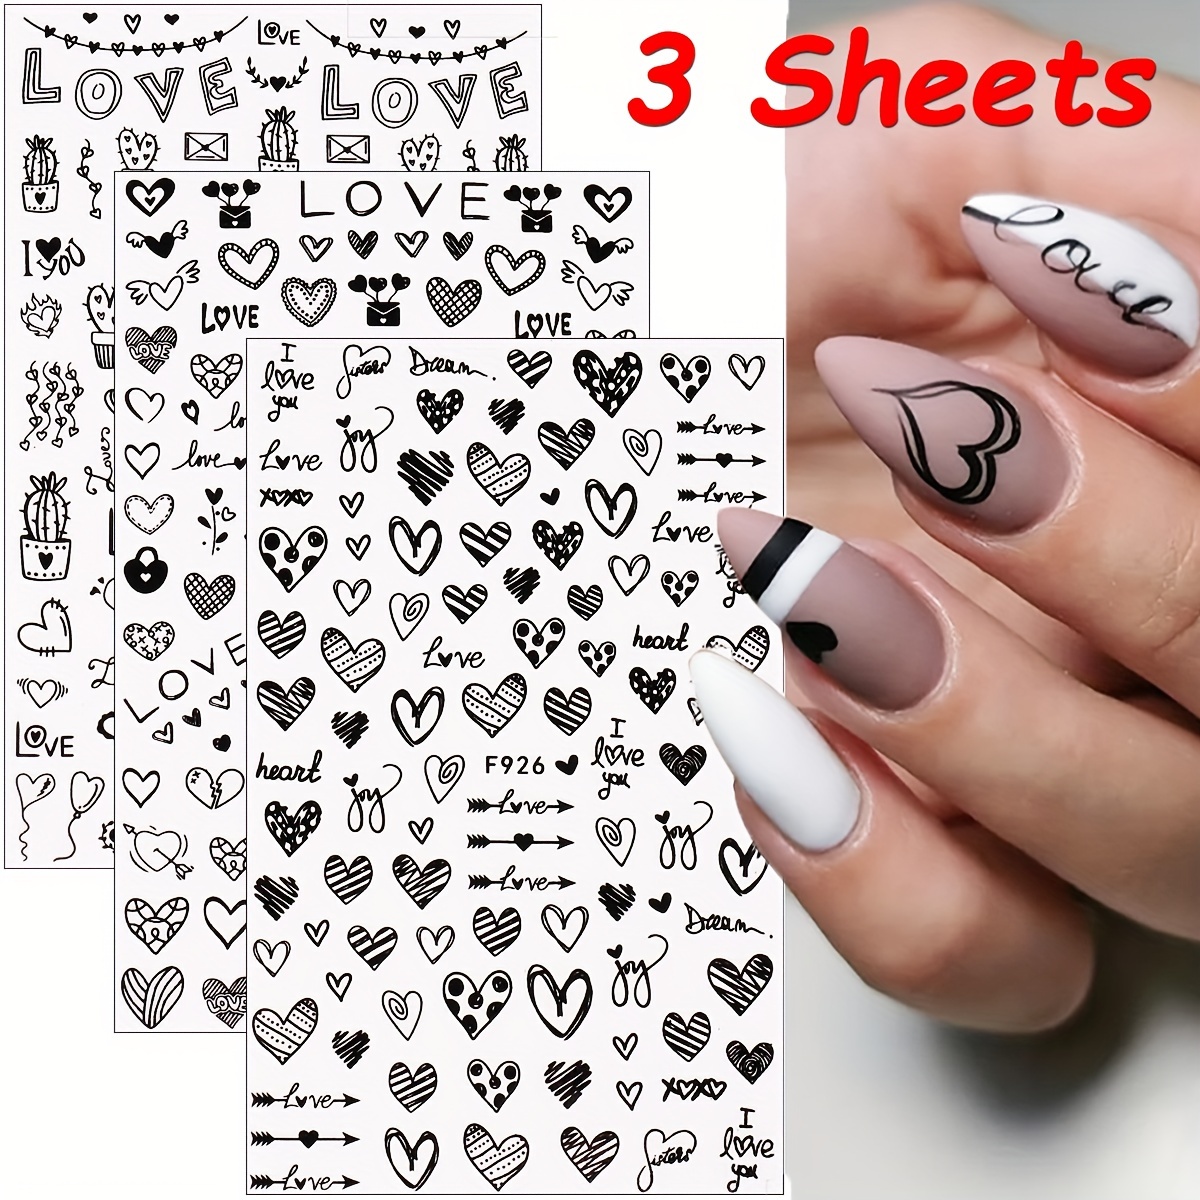 10 Sheets Retro Flower Nail Art Foil Transfer Stickers, Adhesive Nail Art  Supplies For Acrylic Nails Foil Stickers, Nails Supply Floral Manicure Tips